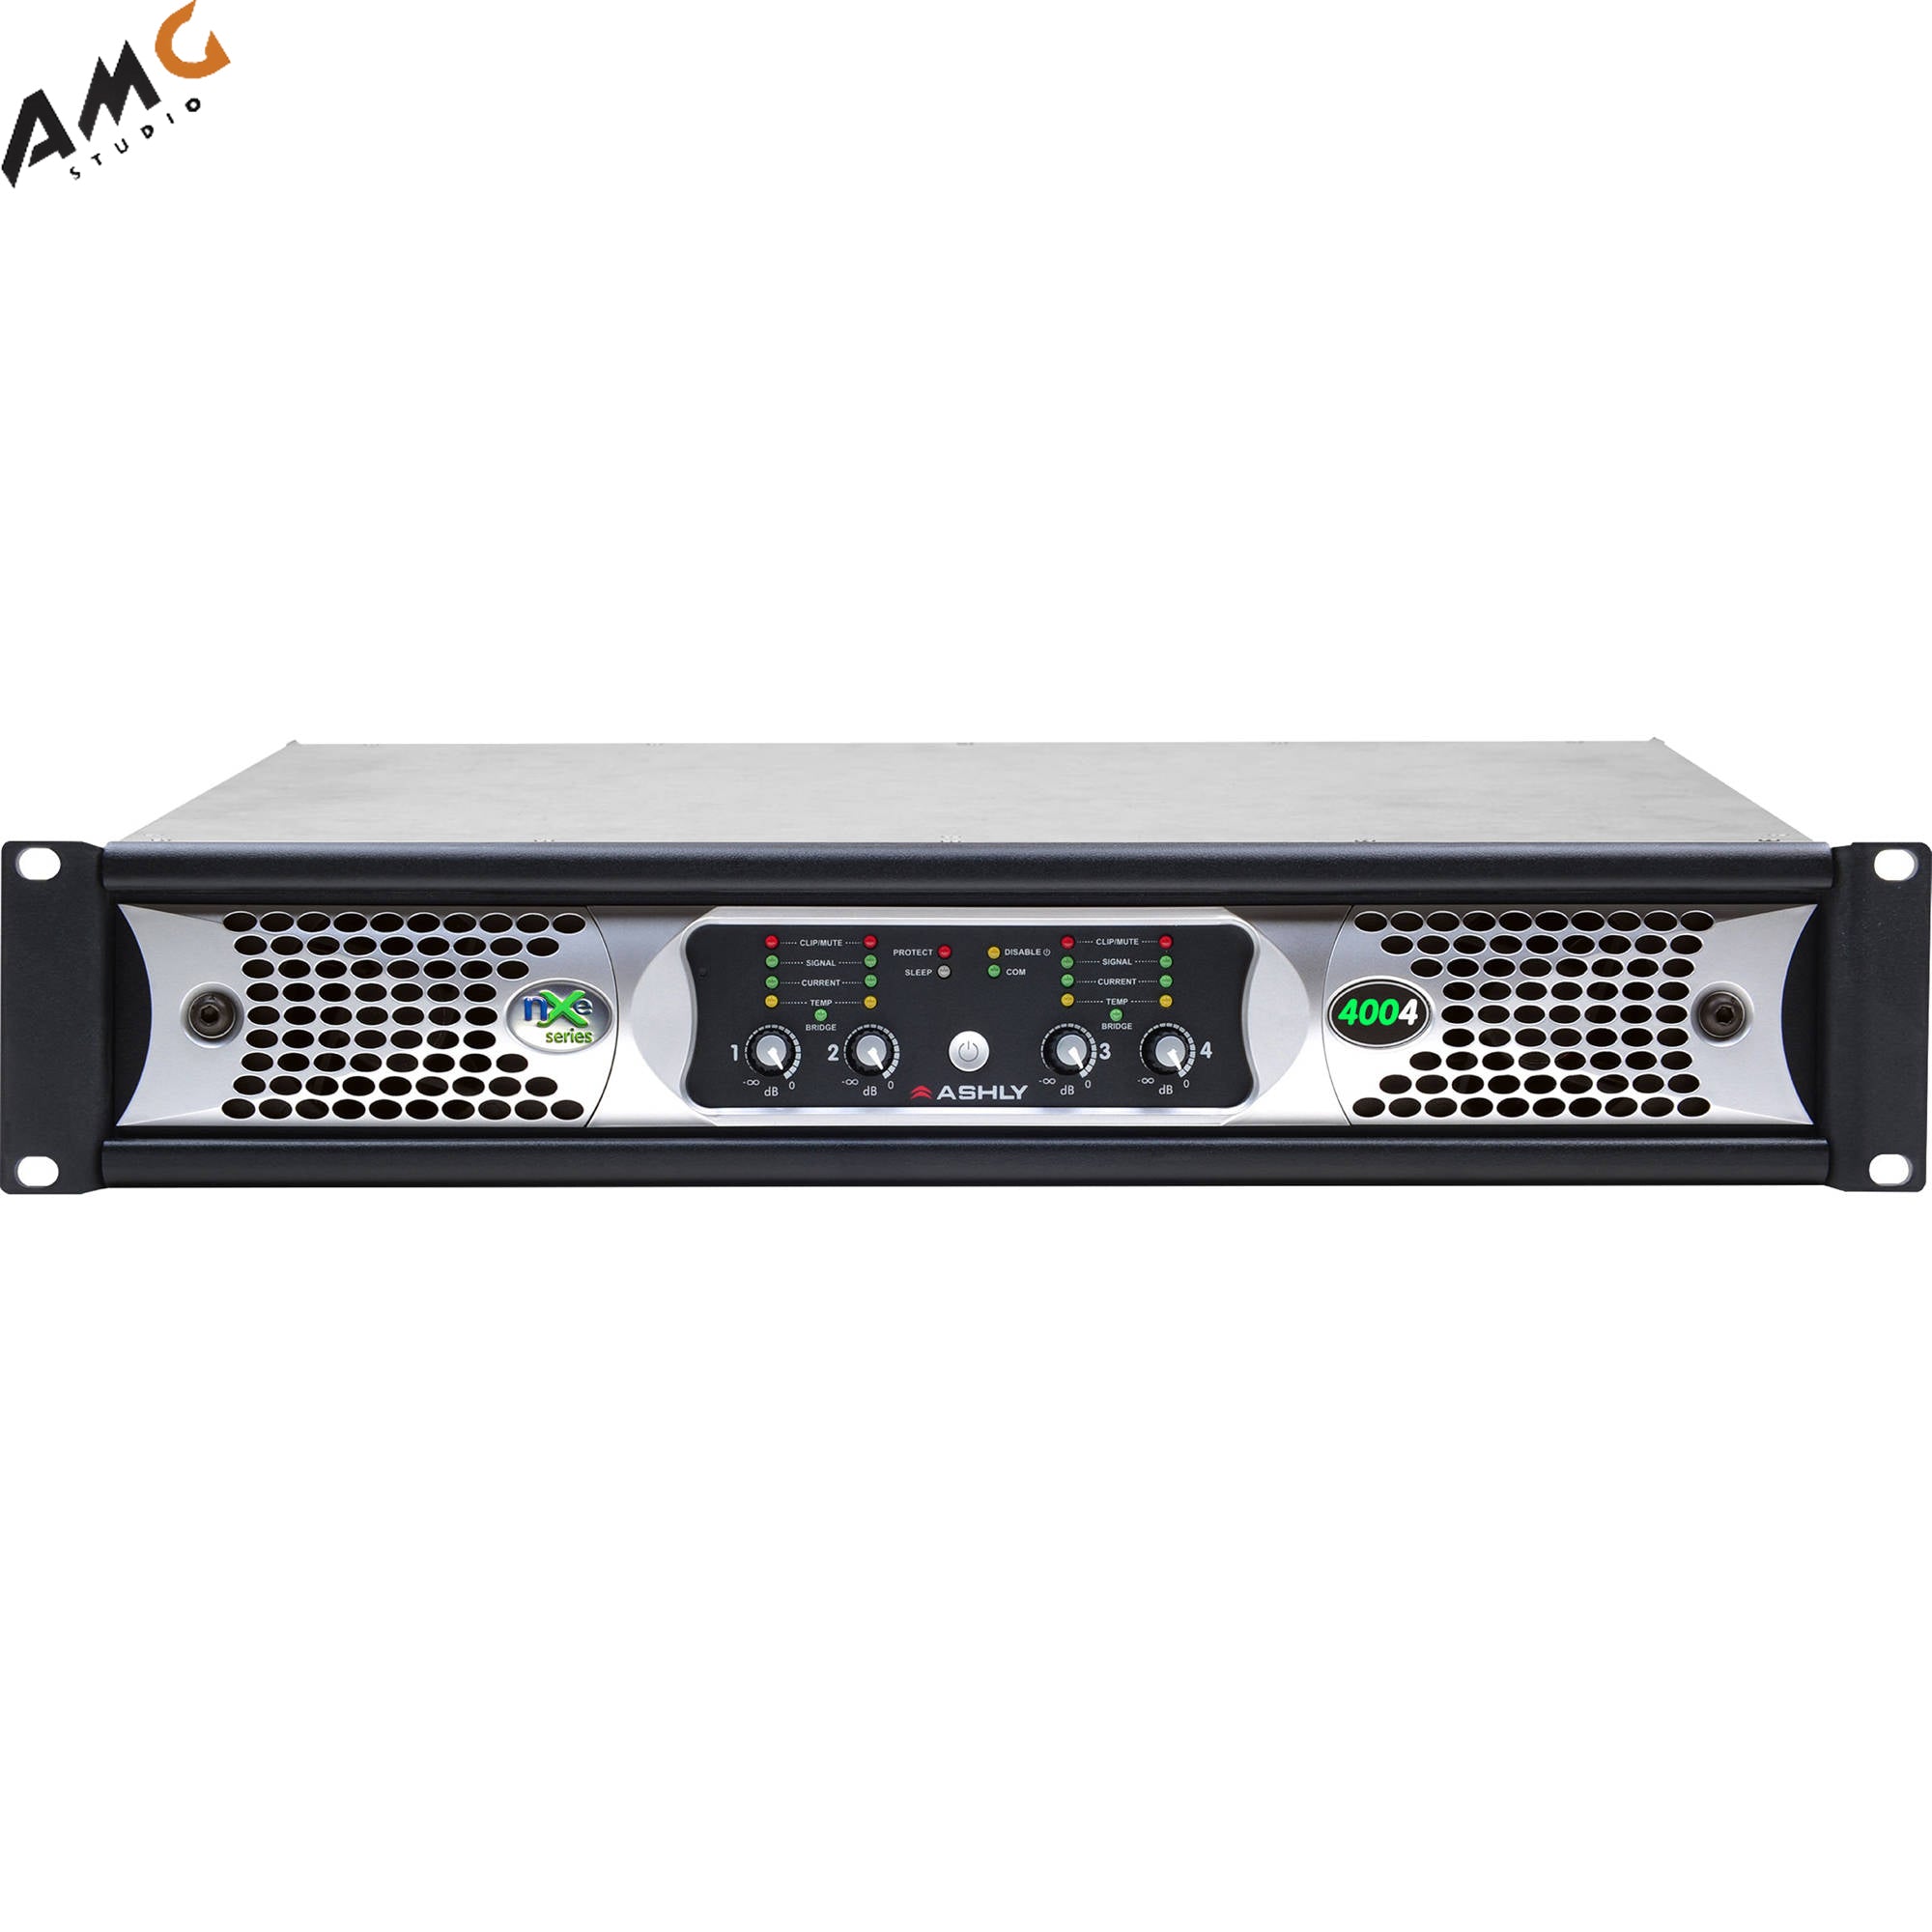 Ashly nXe4004bd 4x 400 Watts/2 Ohms Network Power Amplifier with OPDante Cards - Studio AMG